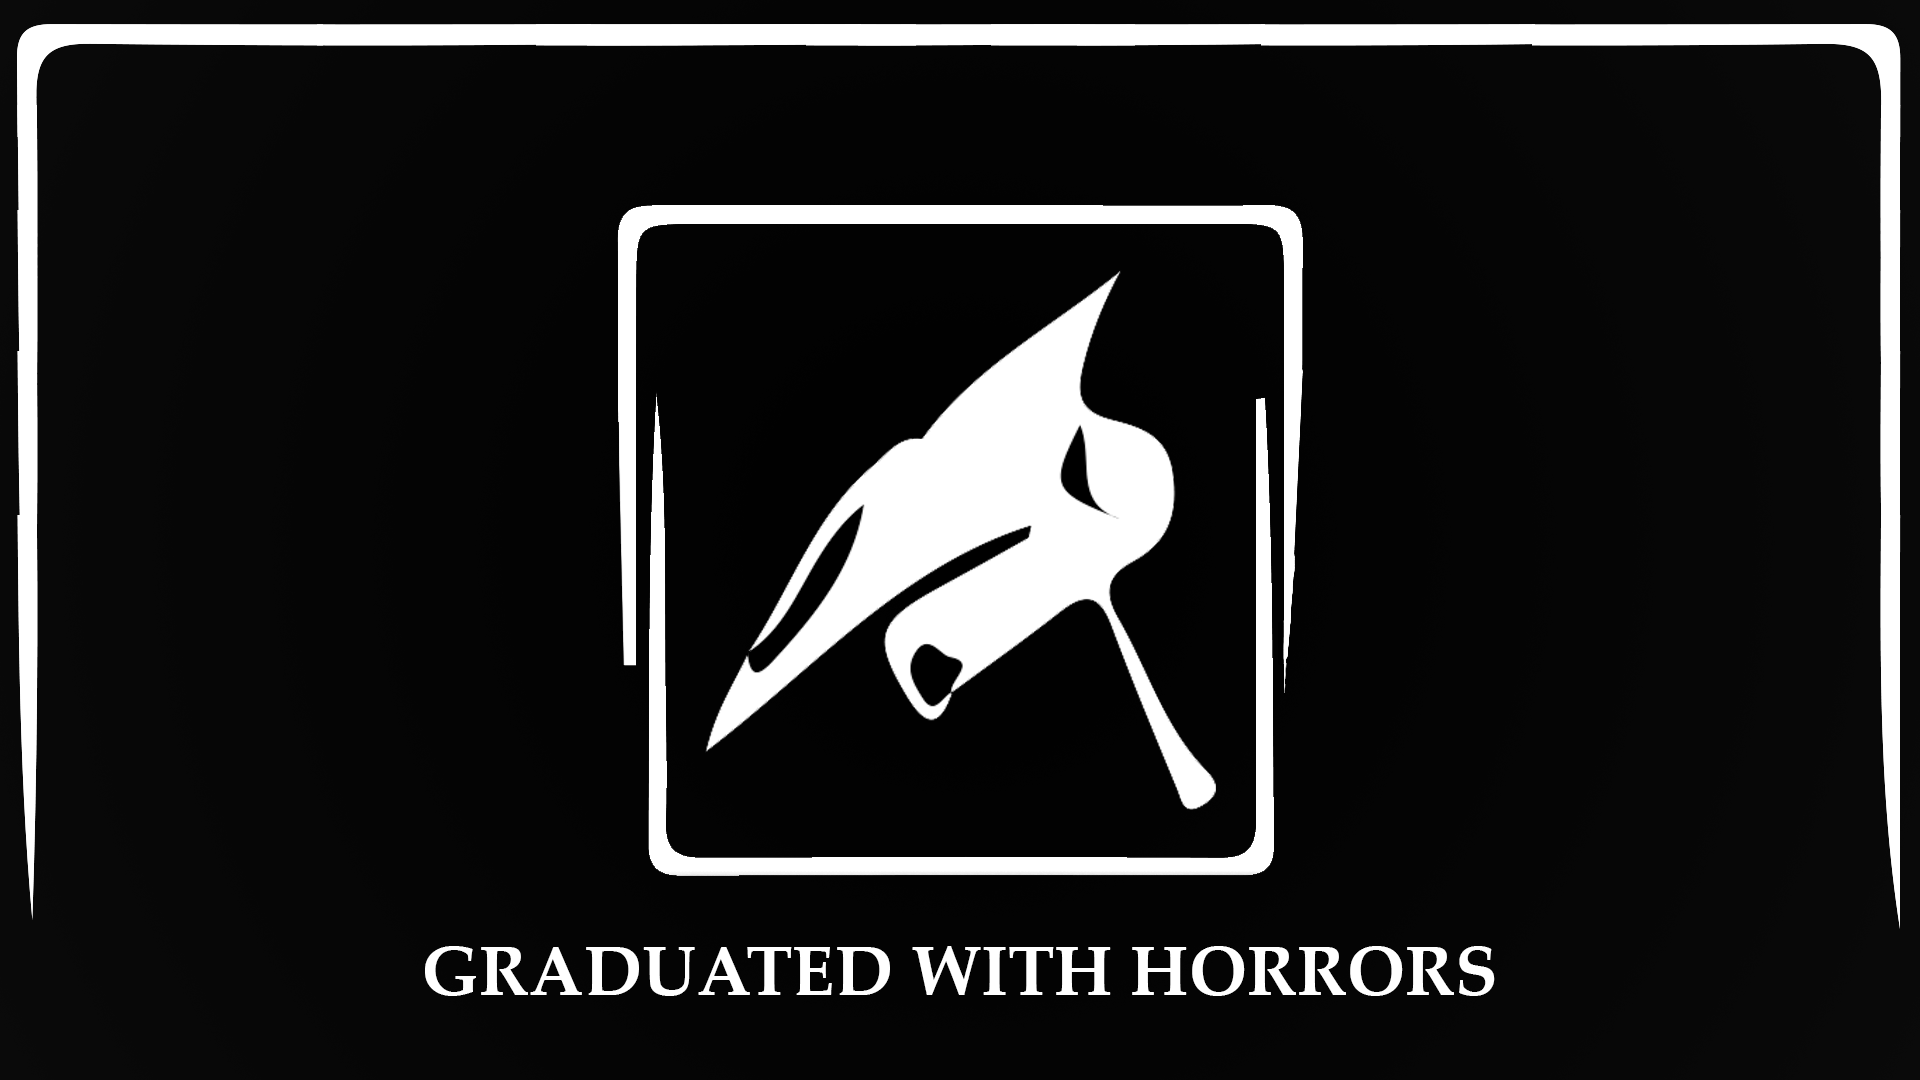 Graduated with horrors